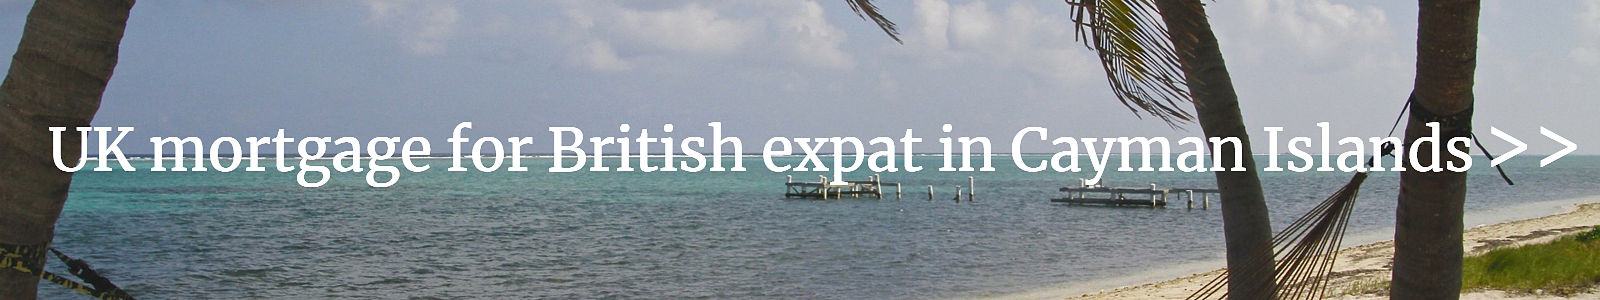 LINK for UK mortgage for British expat in Cayman Islands